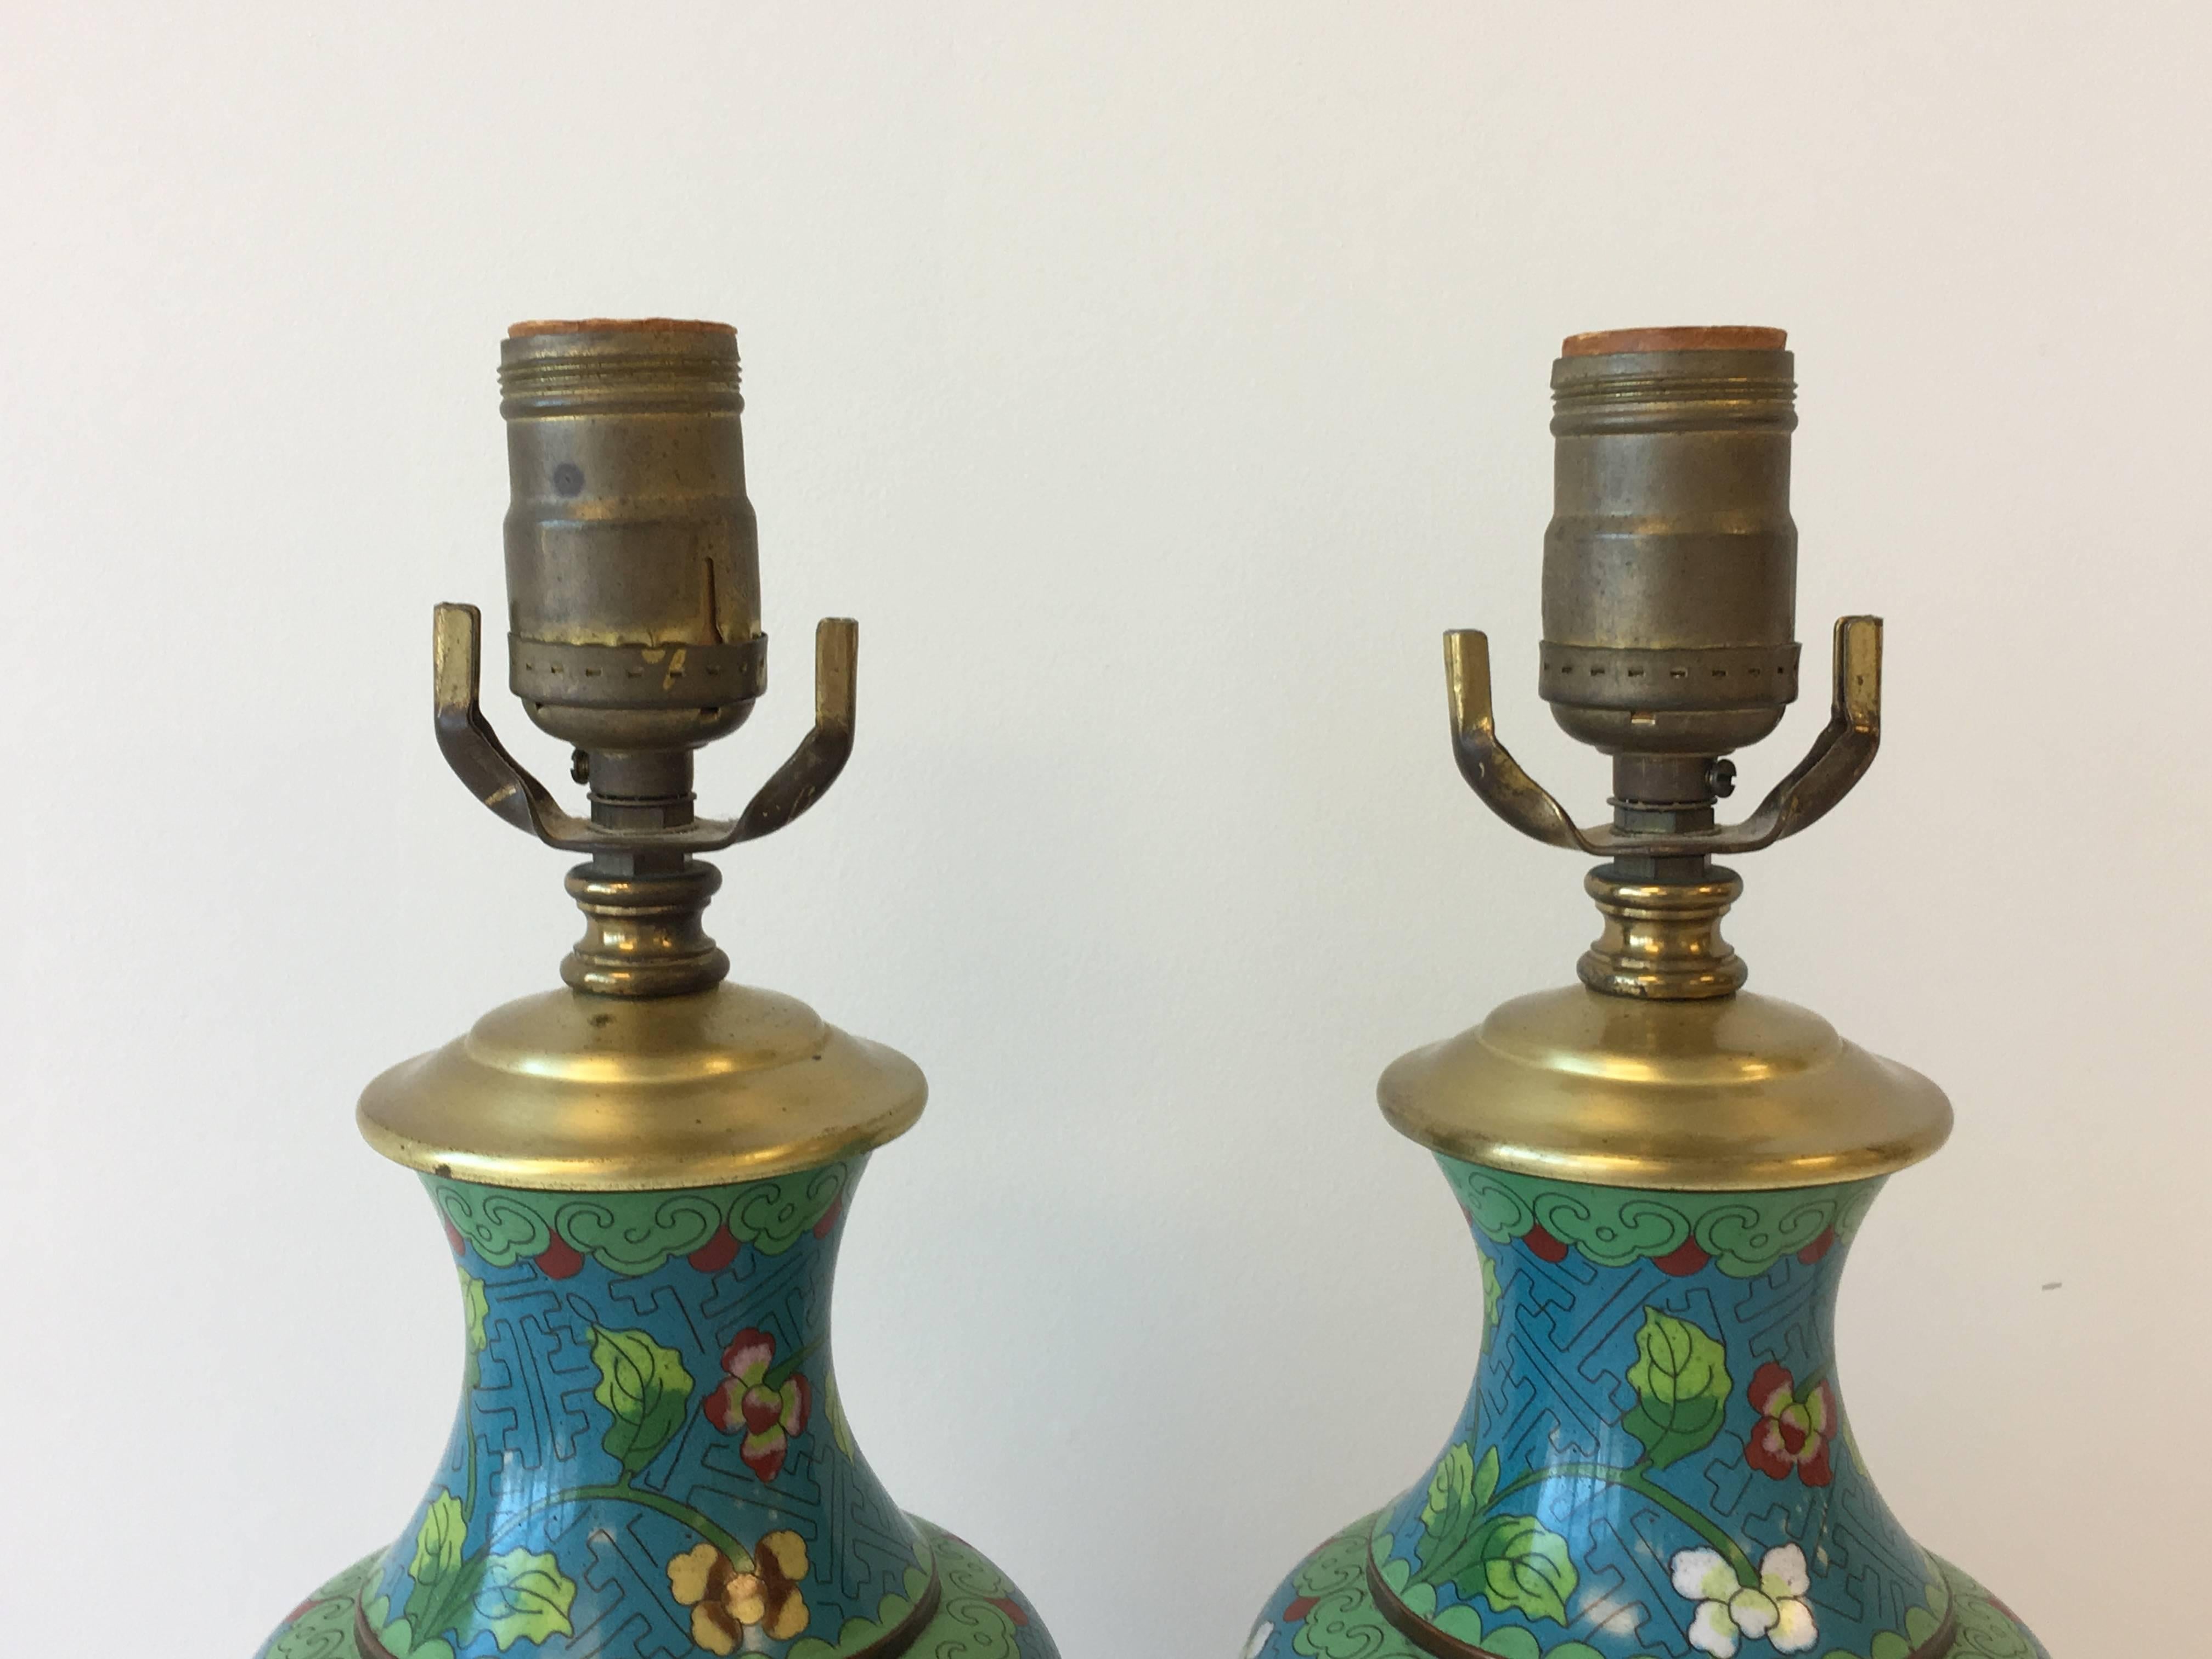 An elegant pair of 19th century cloisonné vases, converted into electrical lamps. A rich blue with floral motif and brass hardware.